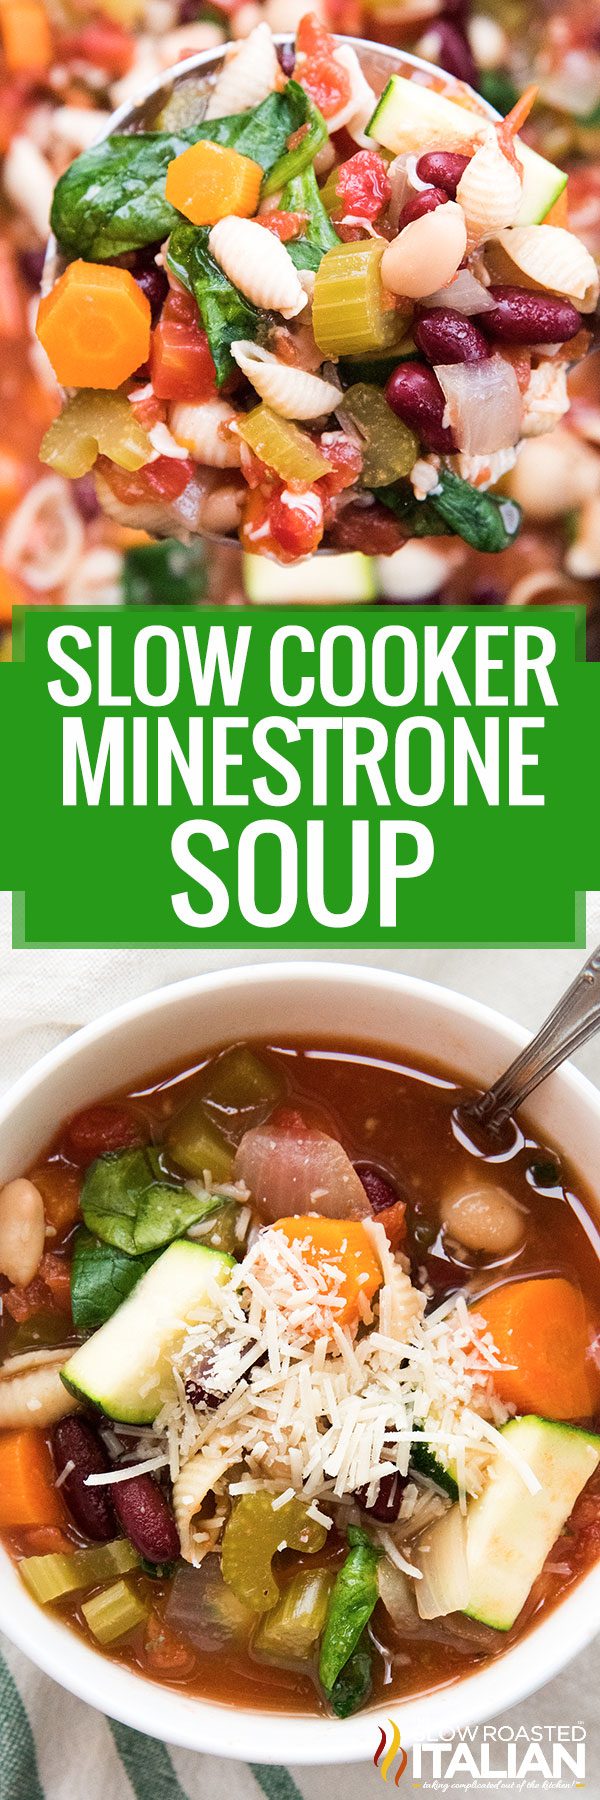 slow cooker minestrone soup -pin